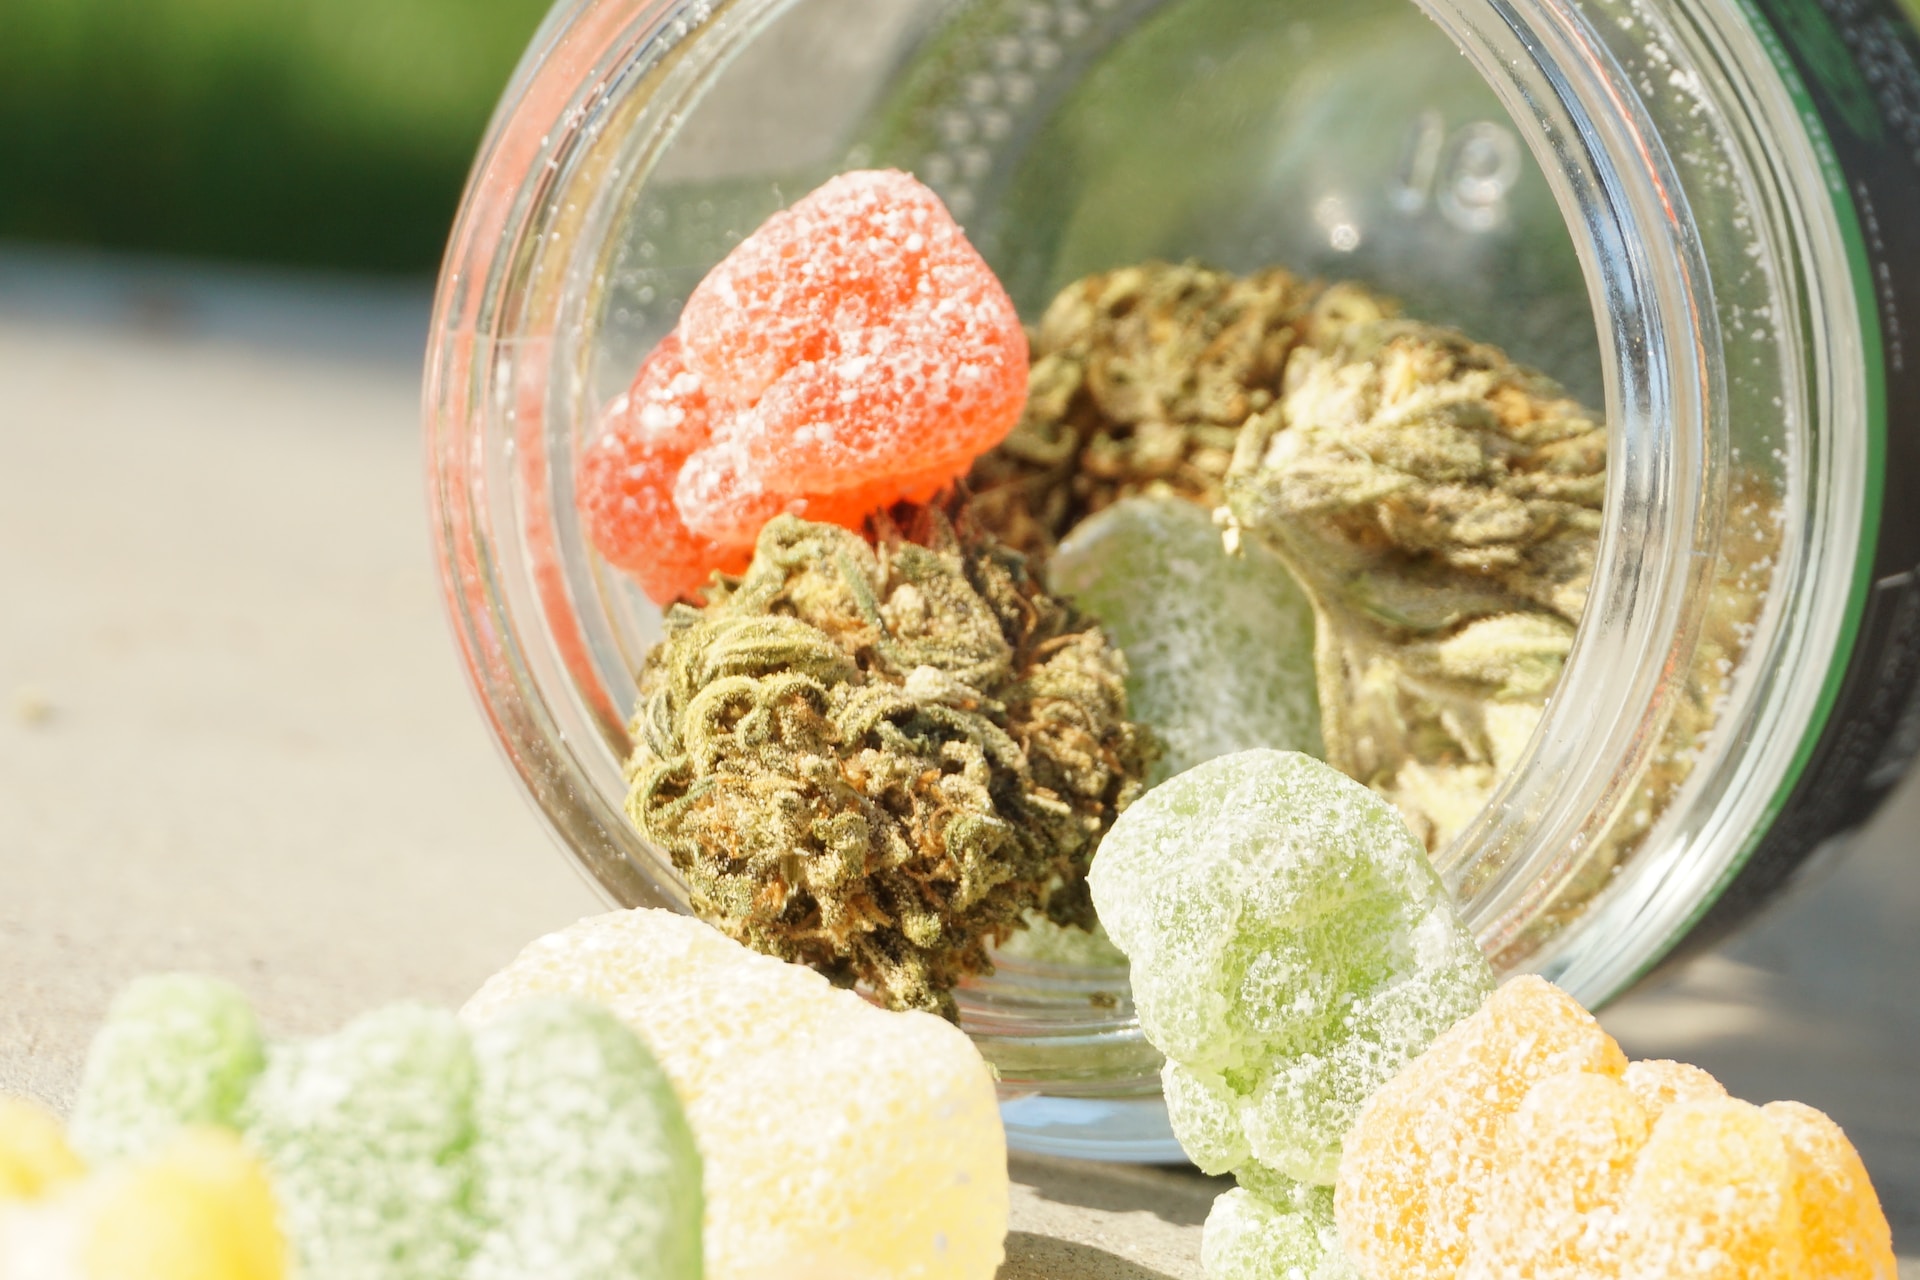 5 Factors to Consider When Buying the Best CBD Edibles